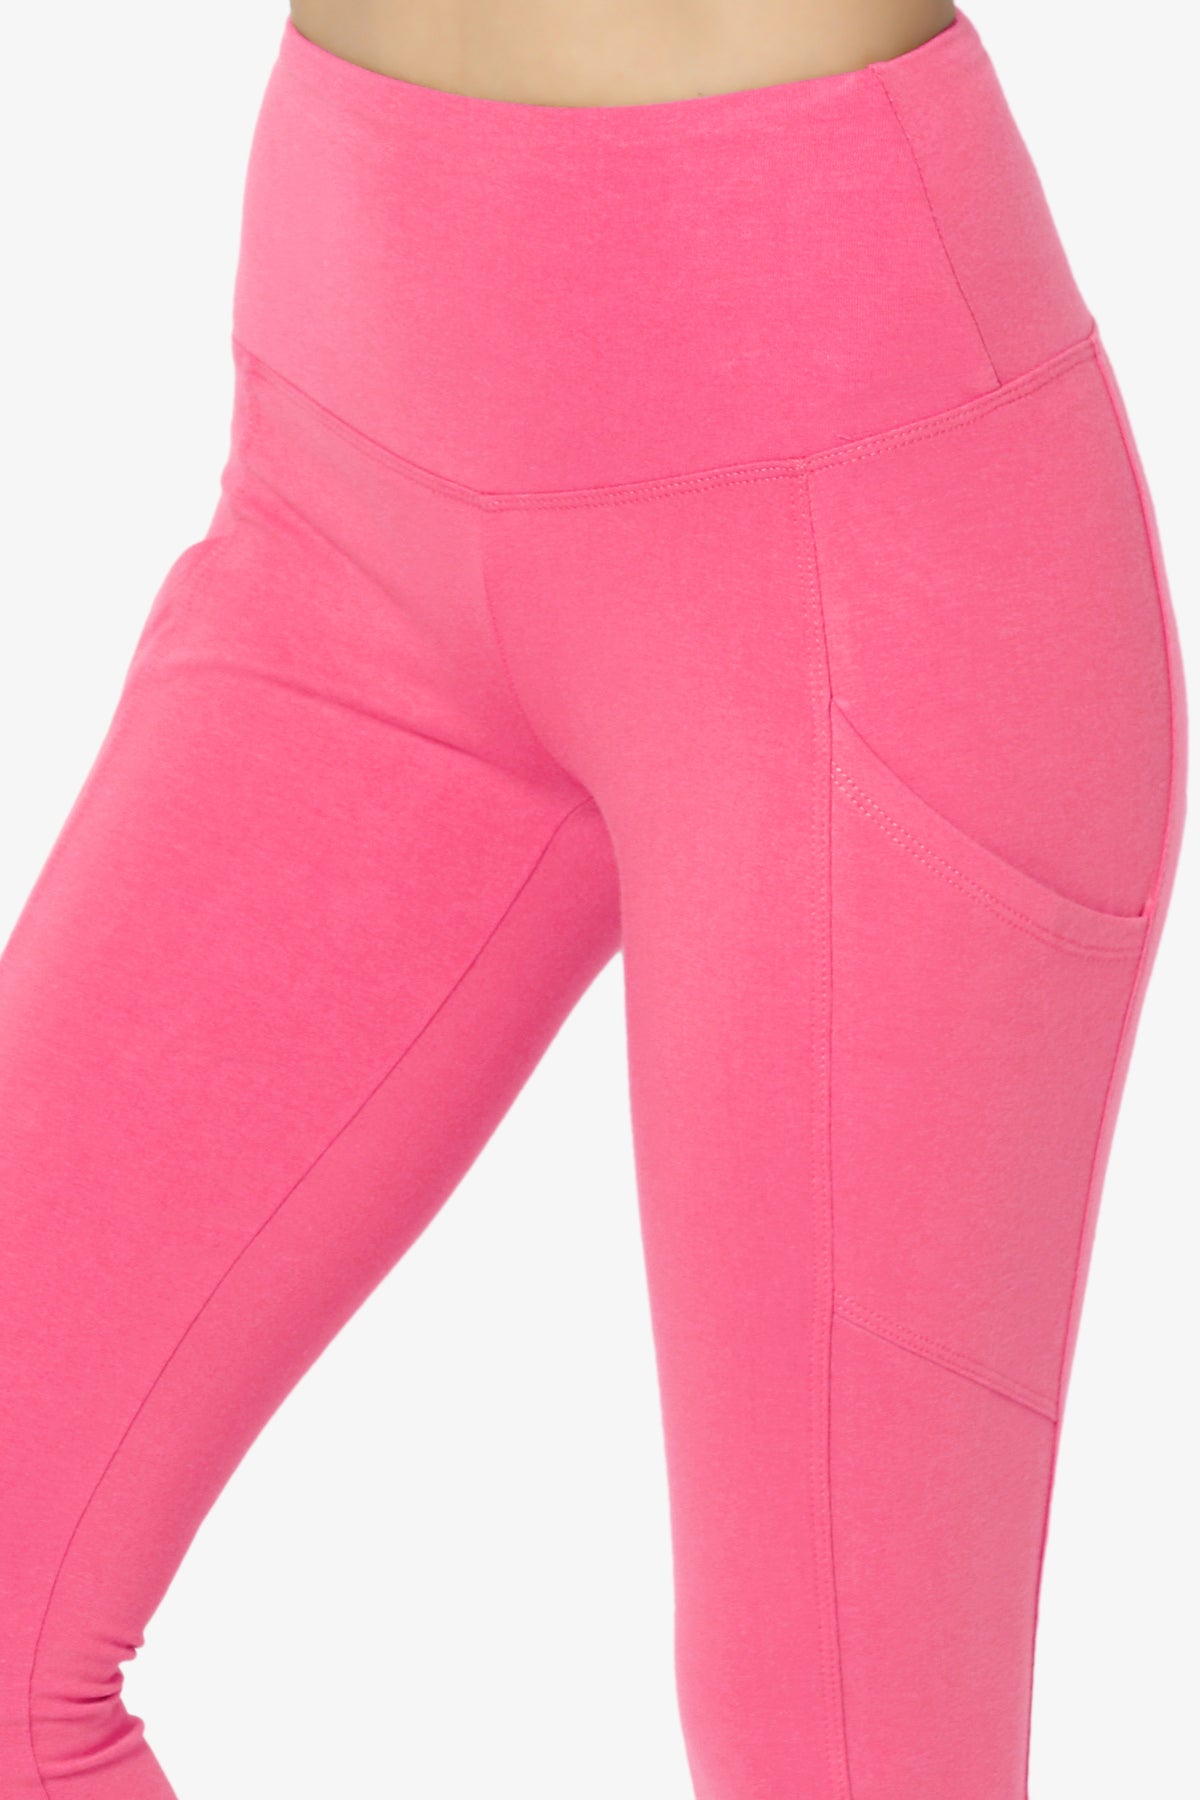 Ansley Luxe Cotton Leggings with Pockets FUCHSIA_5